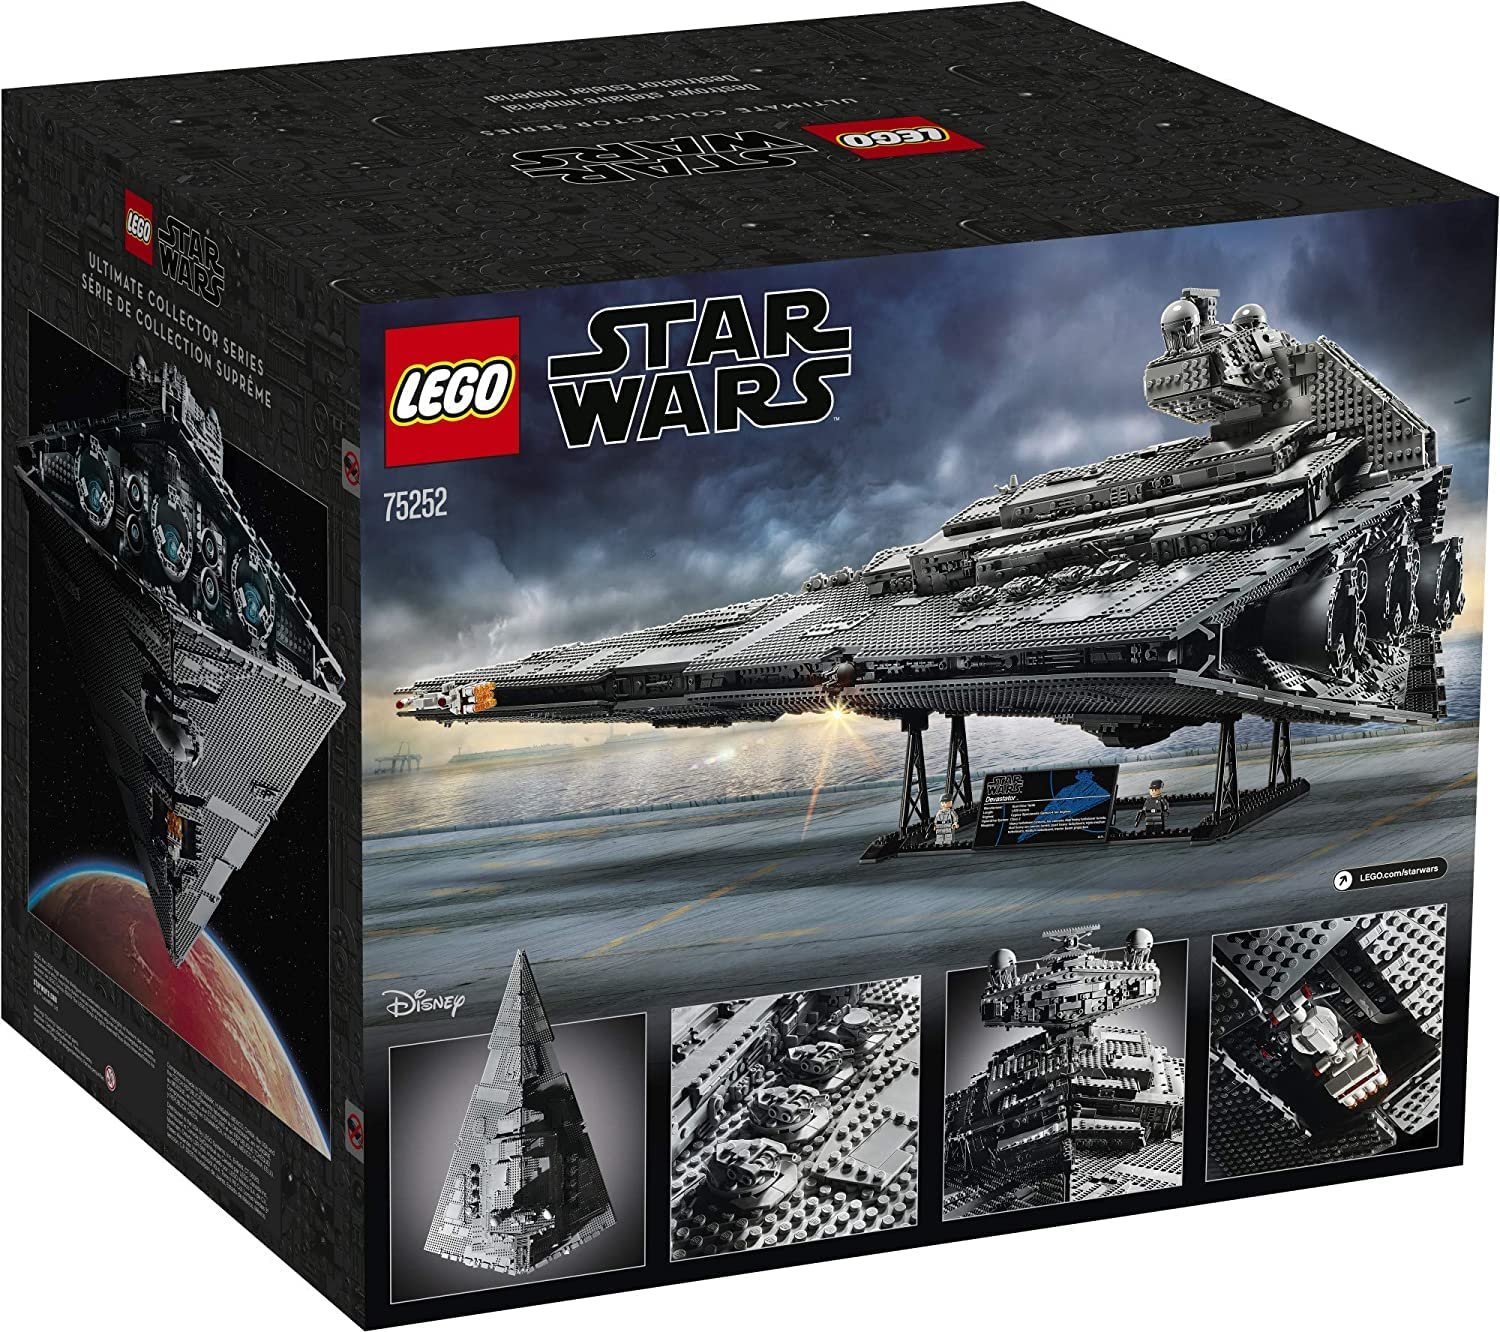  LEGO 75252 Star Wars Imperial Star Destroyer, Collectible Model  Building kit, Ultimate Collector Series, Home Décor Gift Idea : Toys & Games